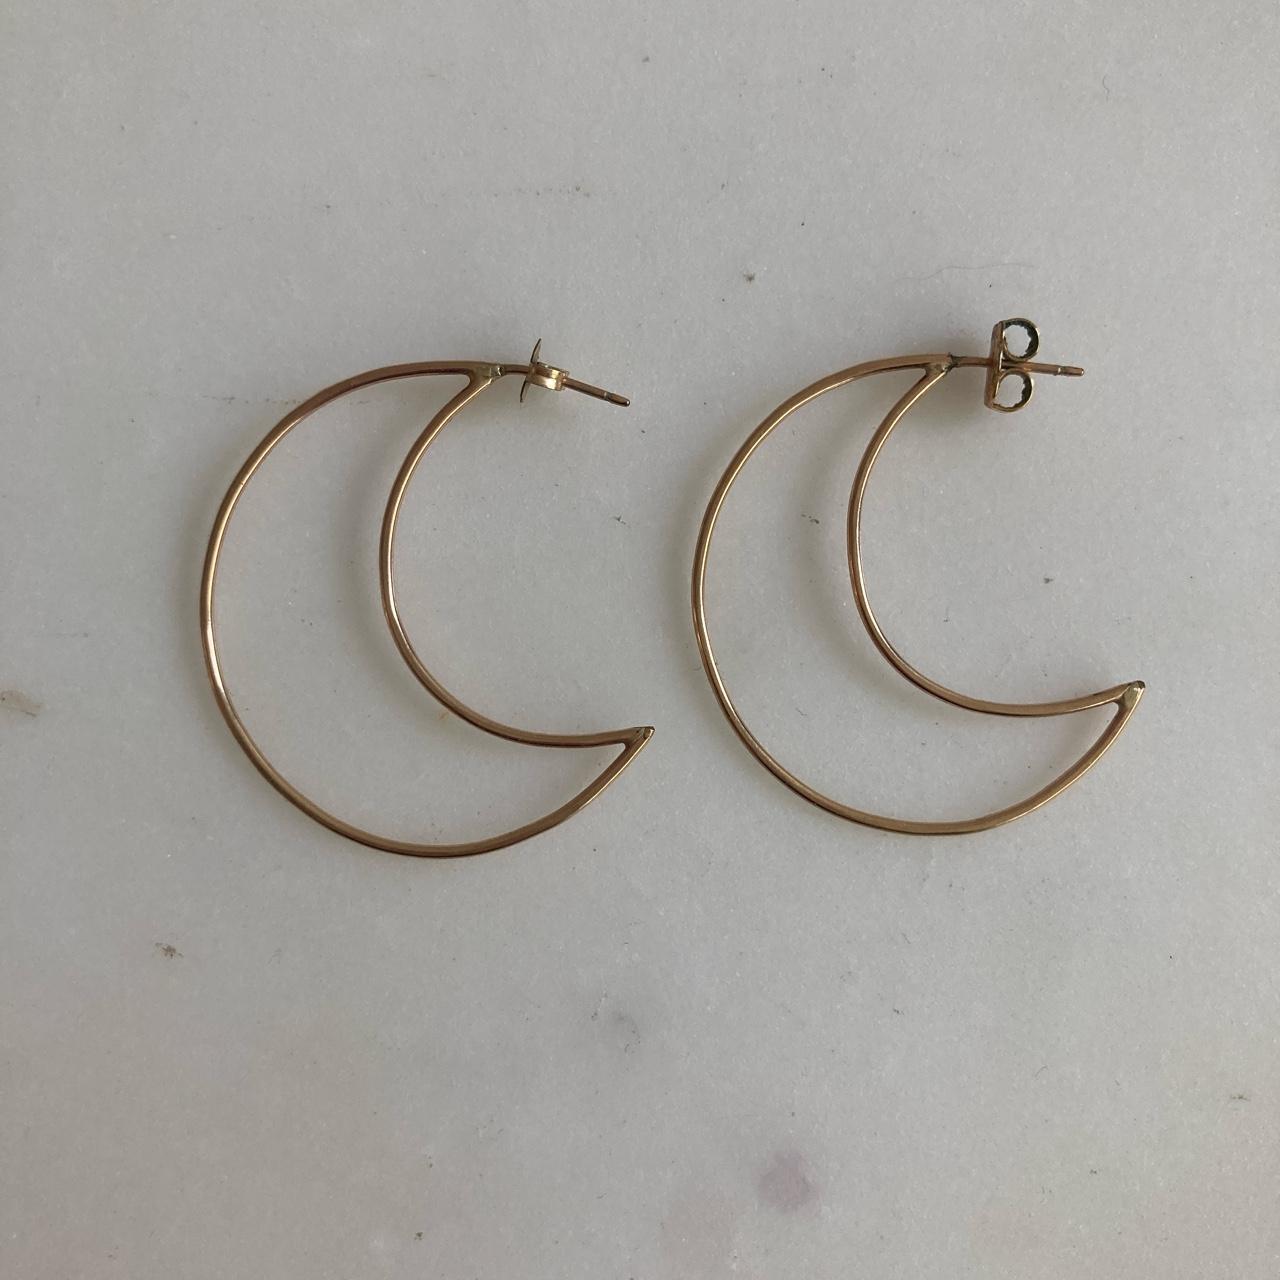 Product Image 1 - Rose gold moon hoops
14k plated